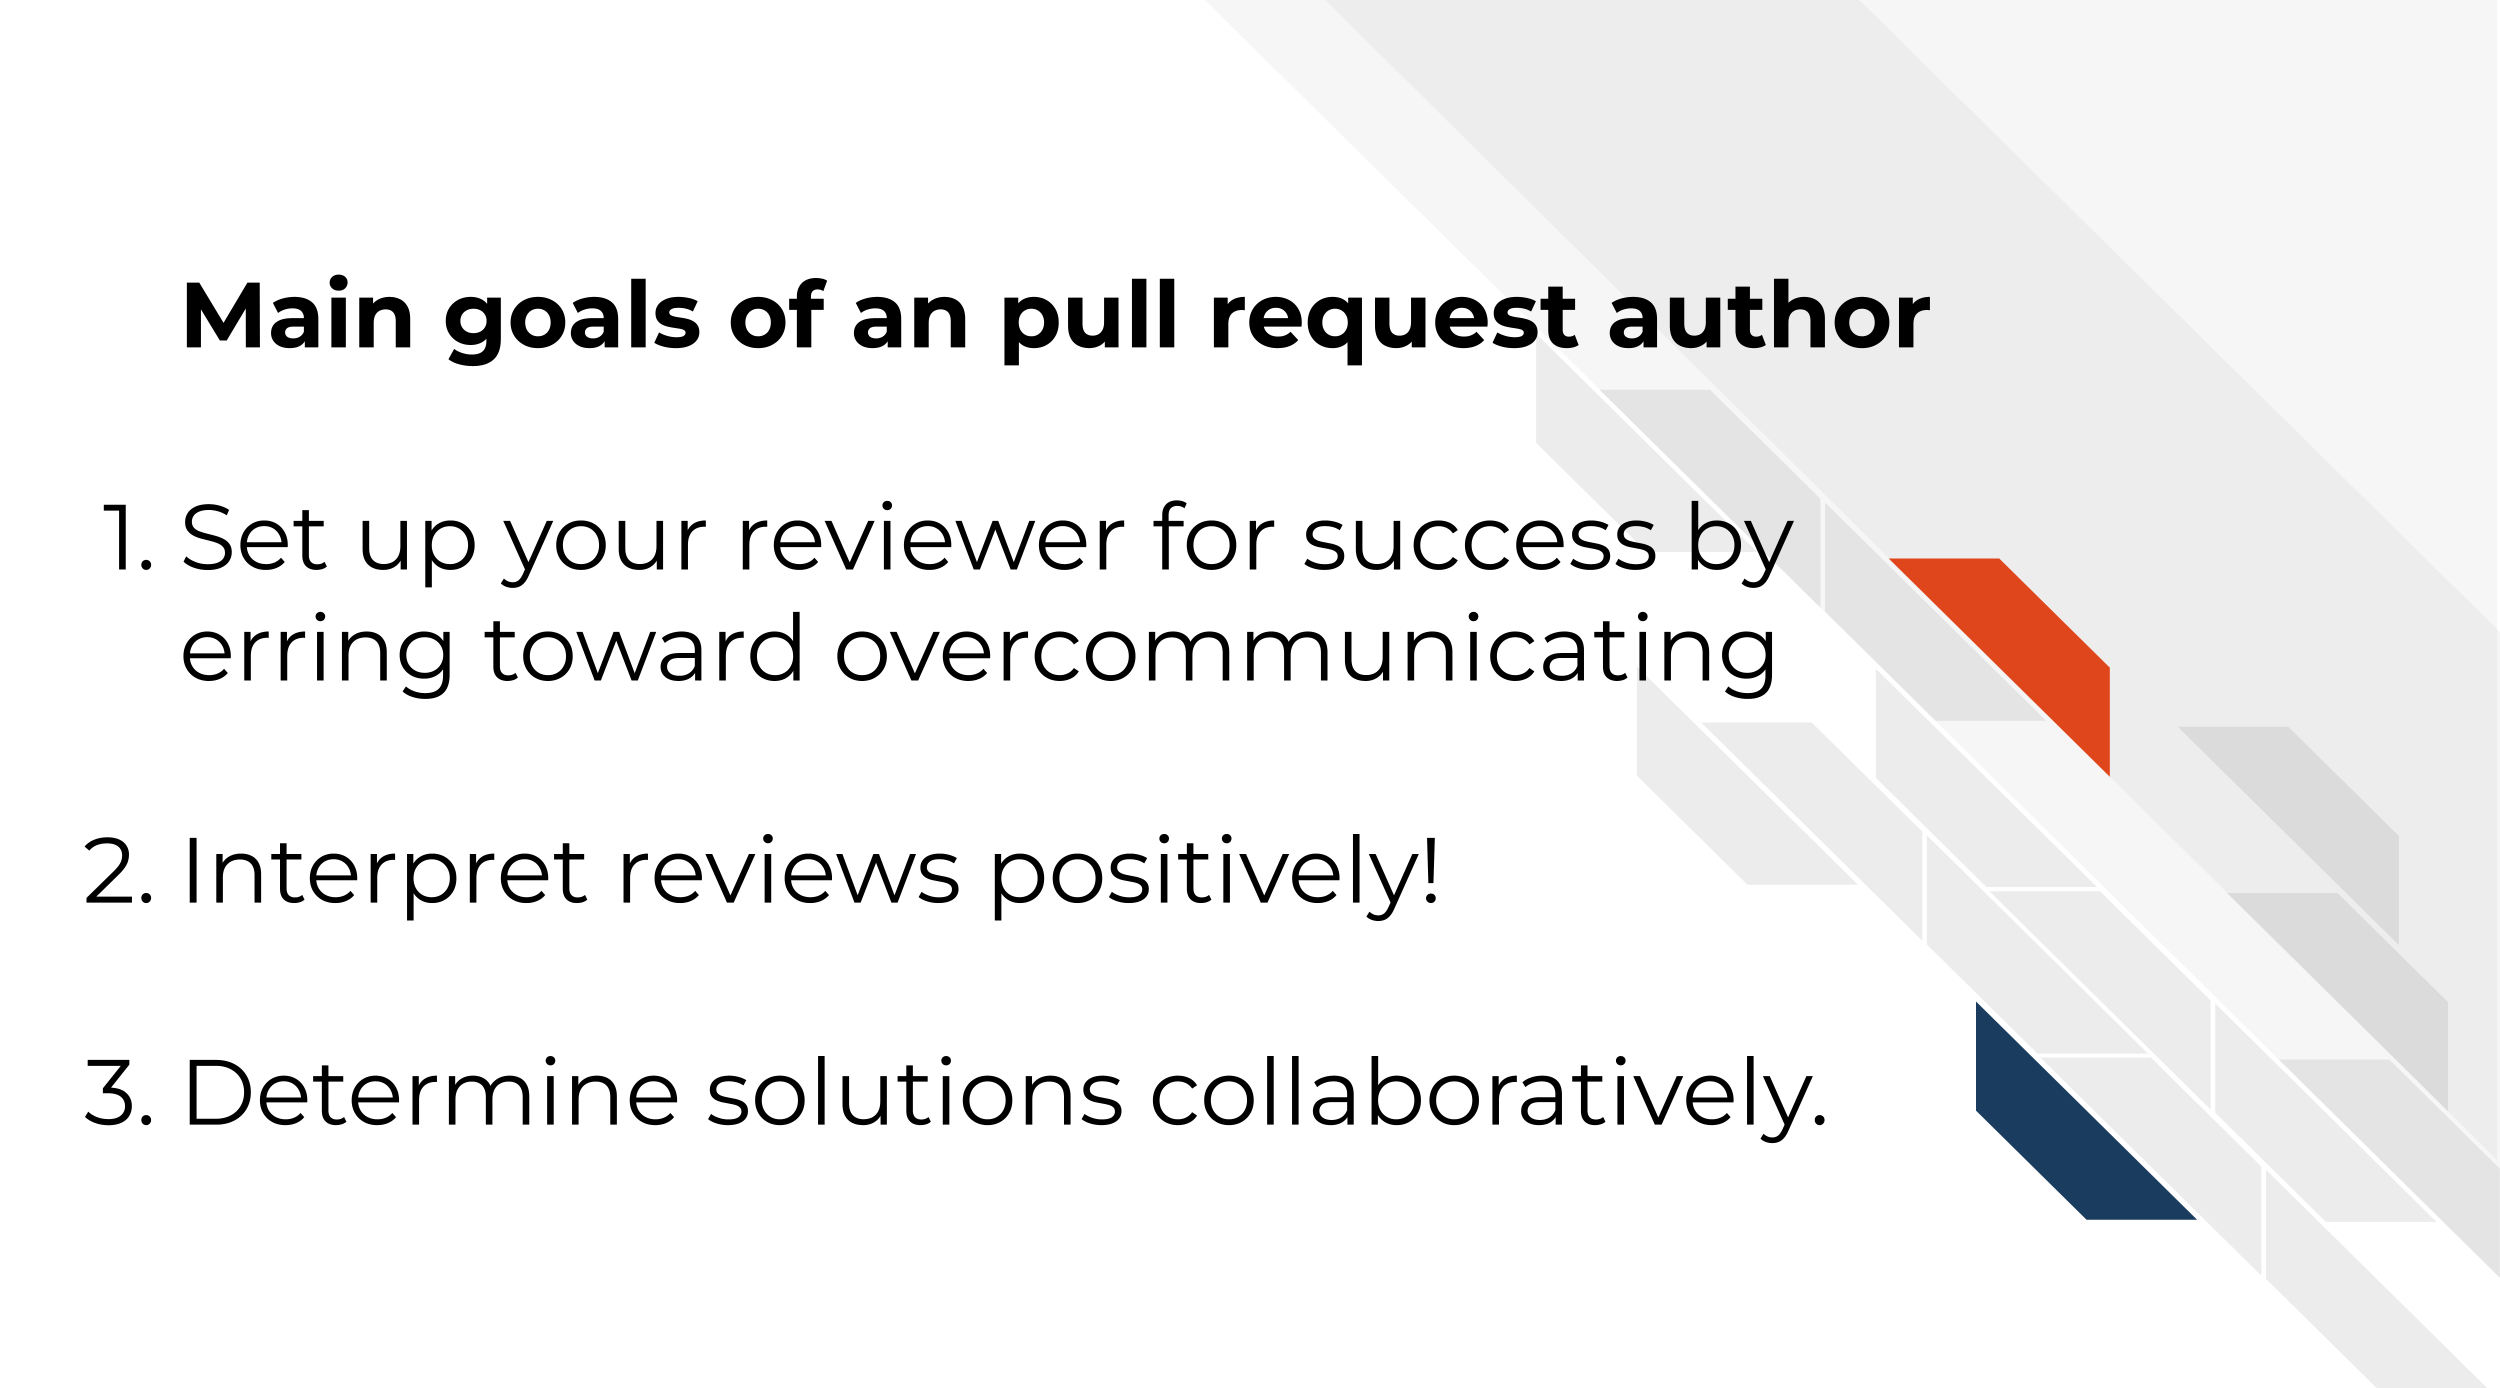 Main goals of an pull request author Set up your reviewer for success by erring toward overcommunicating Interpret reviews positively! Determine solutions collaboratively.